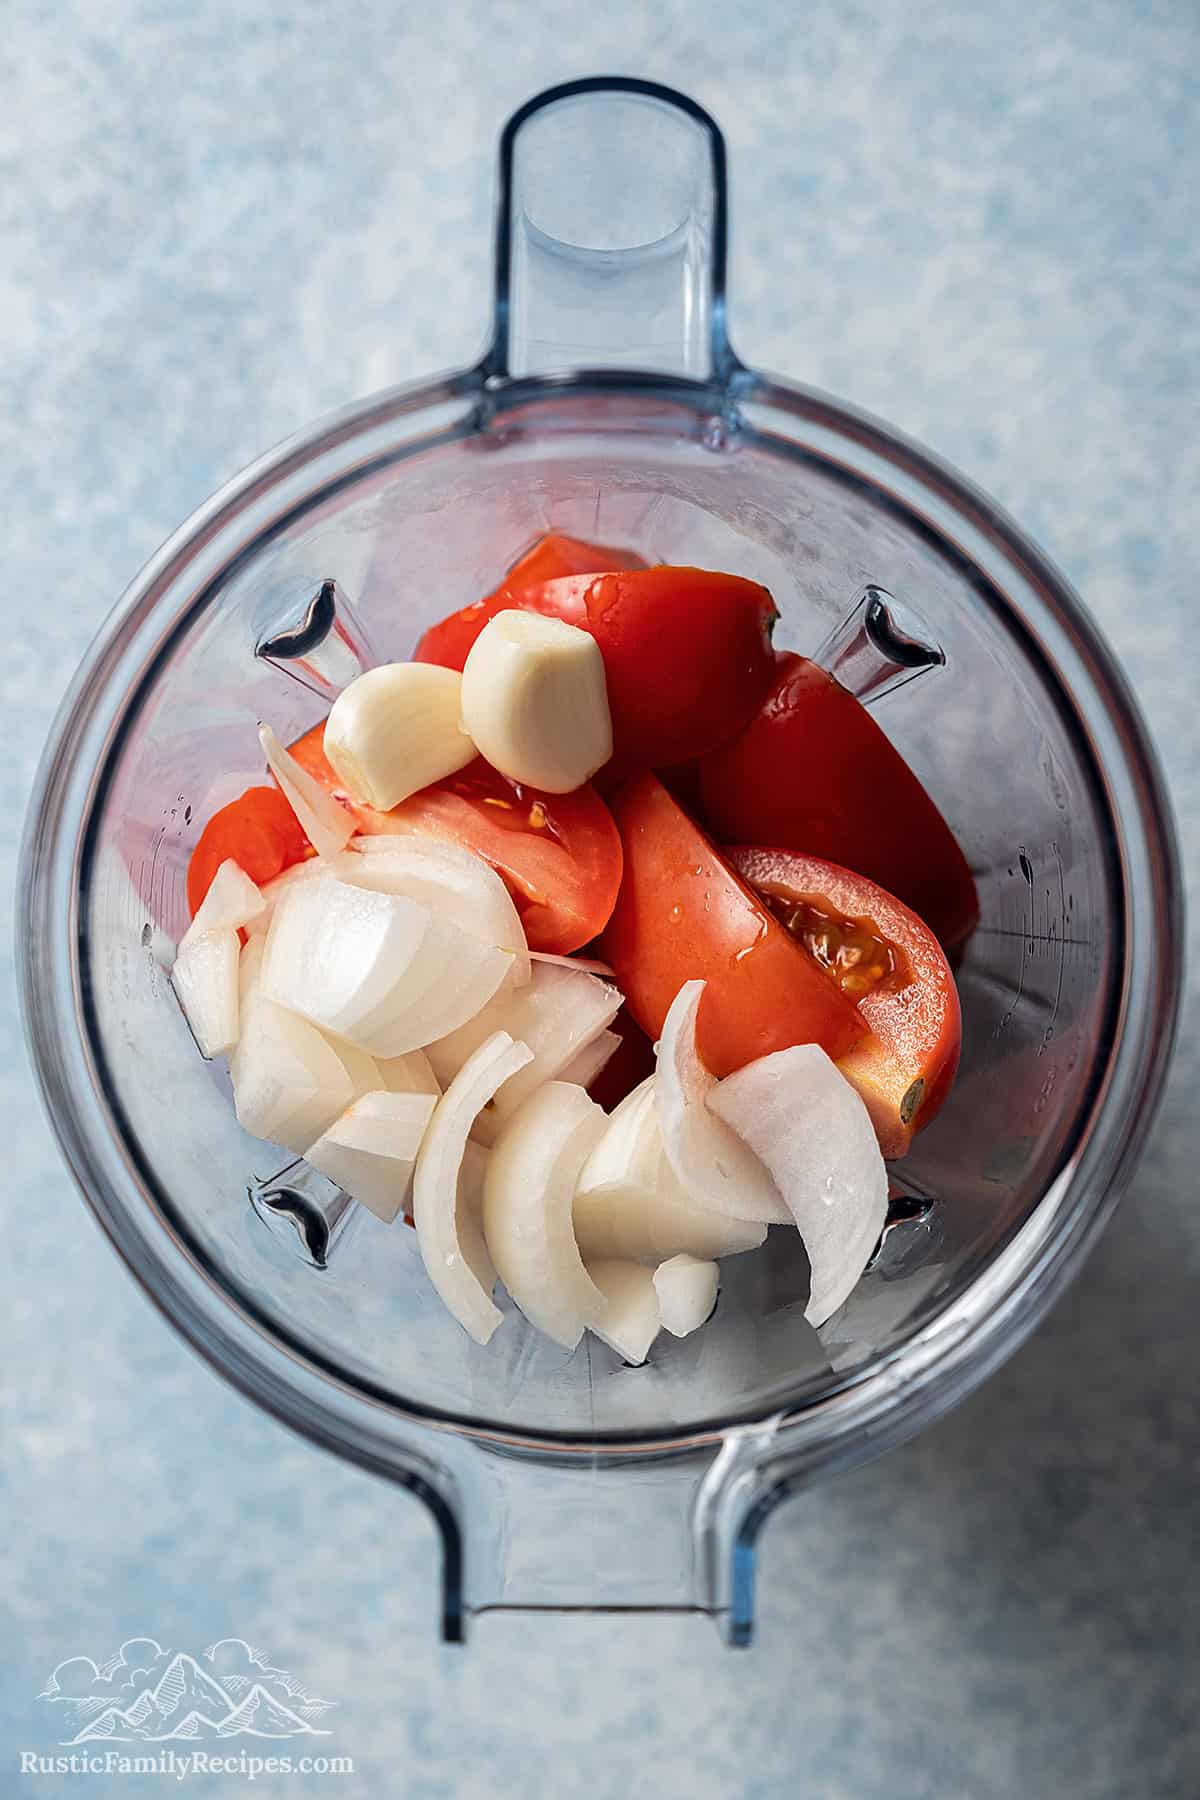 Onions and tomatoes in a blender